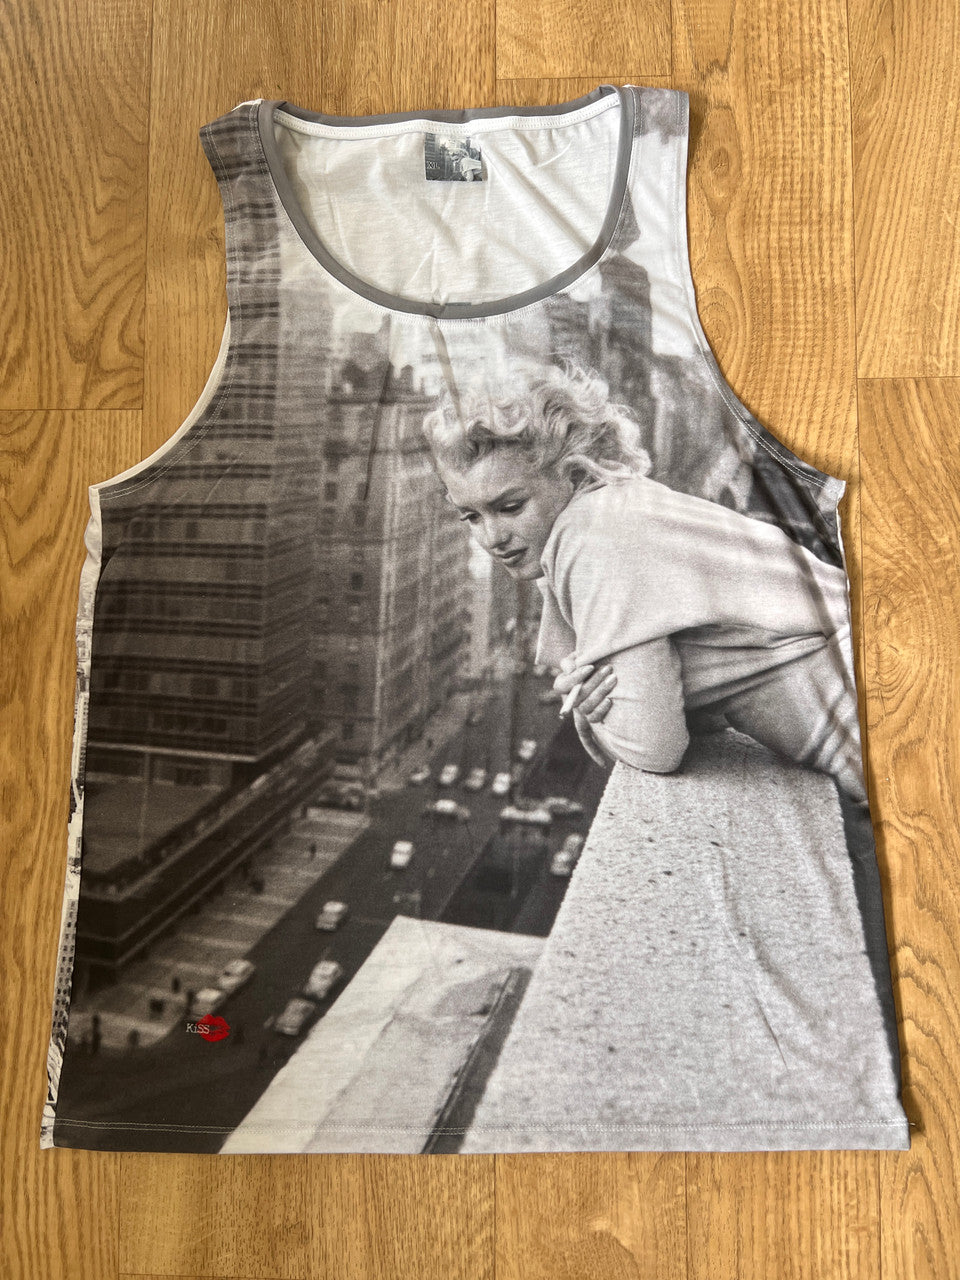 Marilyn Monroe 1955 KiSS Vest - New York City Skater Fashion - Hollywood Seven Year Itch - Gift Idea